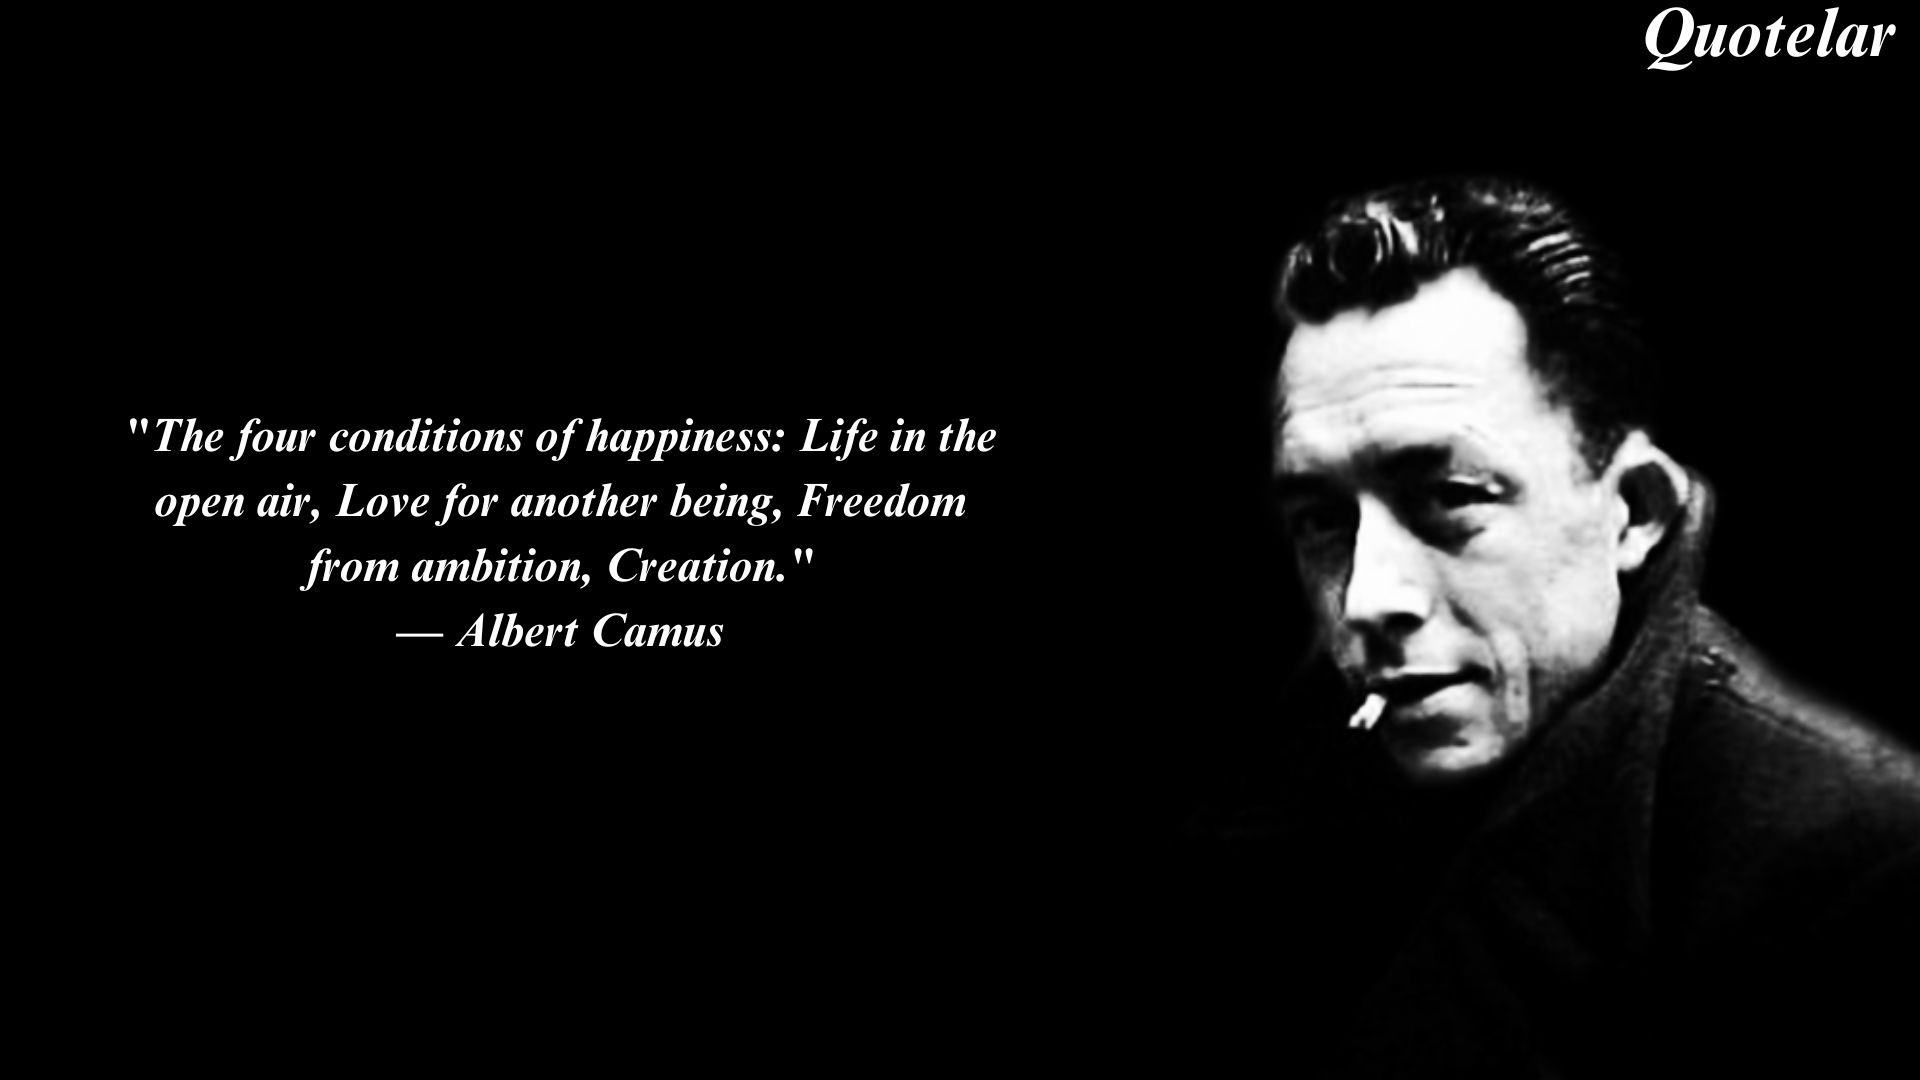 Top 10 Quotes by Albert Camus